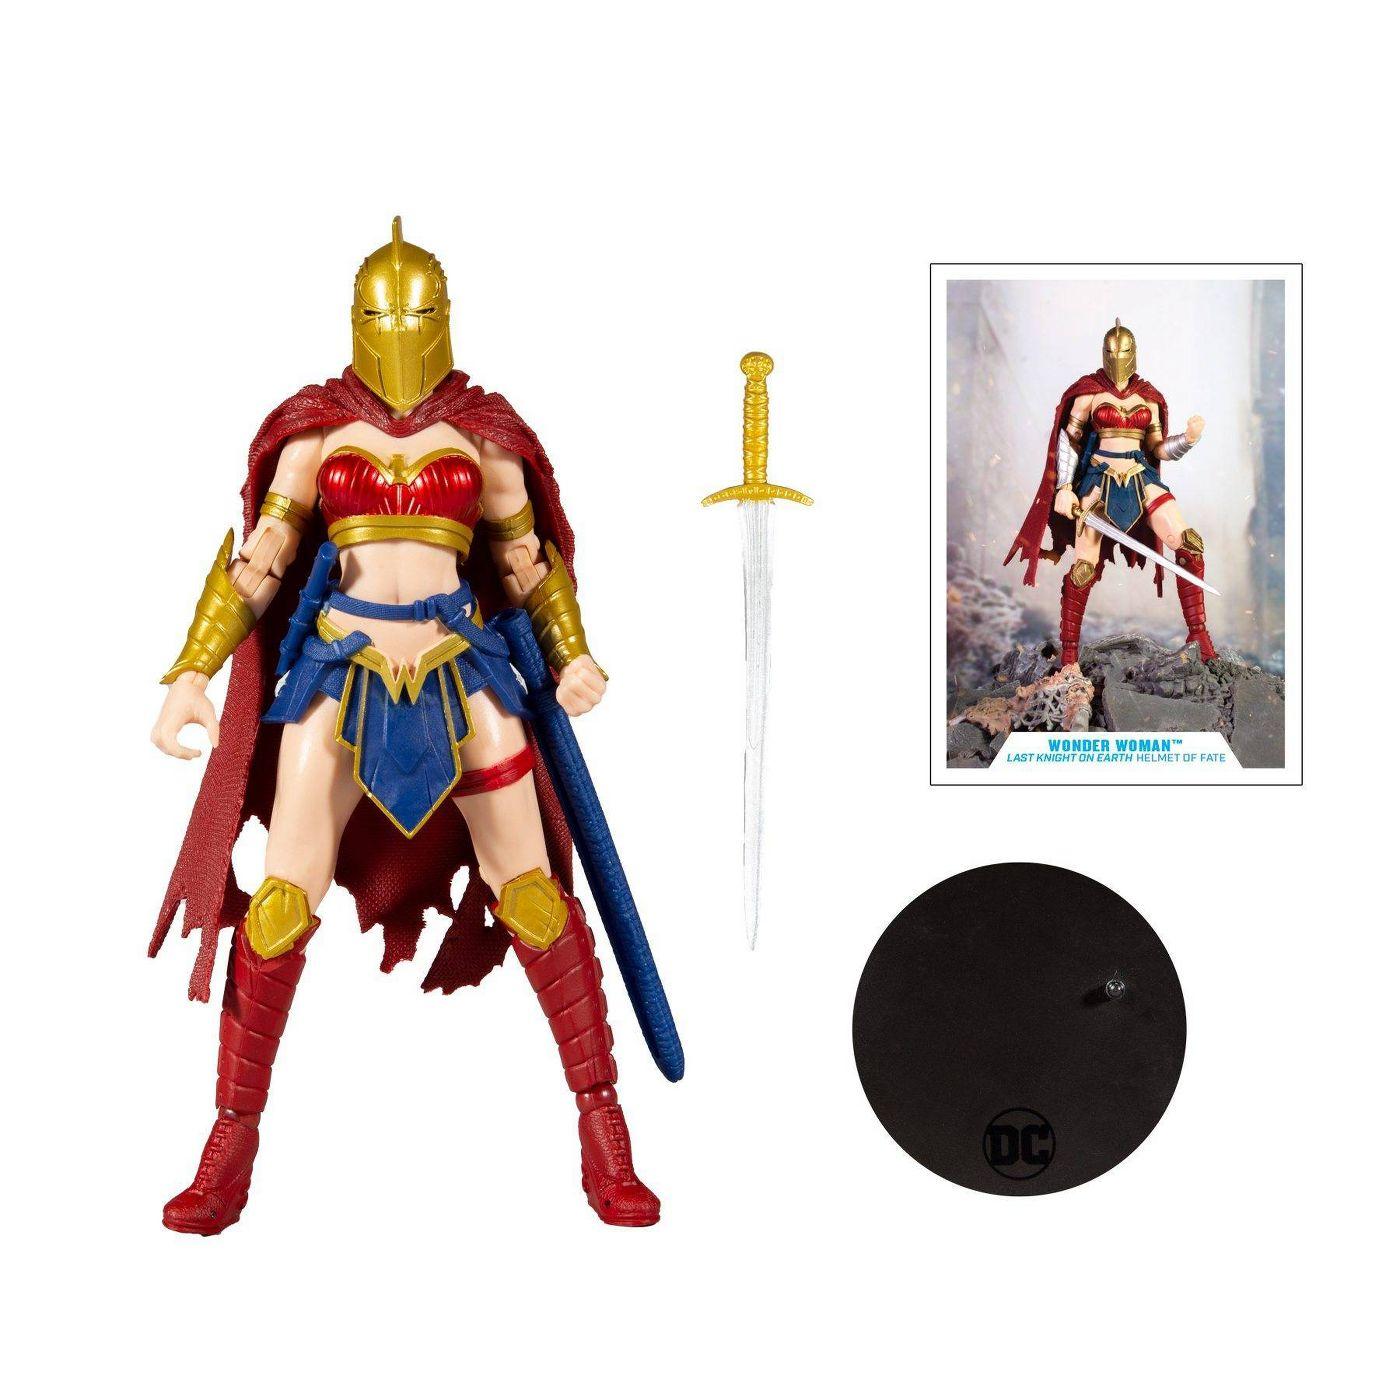 Wonder Woman - To celebrate #WonderWomanDay here is a FIRST LOOK at the Wonder  Woman™ 7” scale figure from McFarlane Toys! Coming soon… A groundbreaking  new era for a DC icon continues